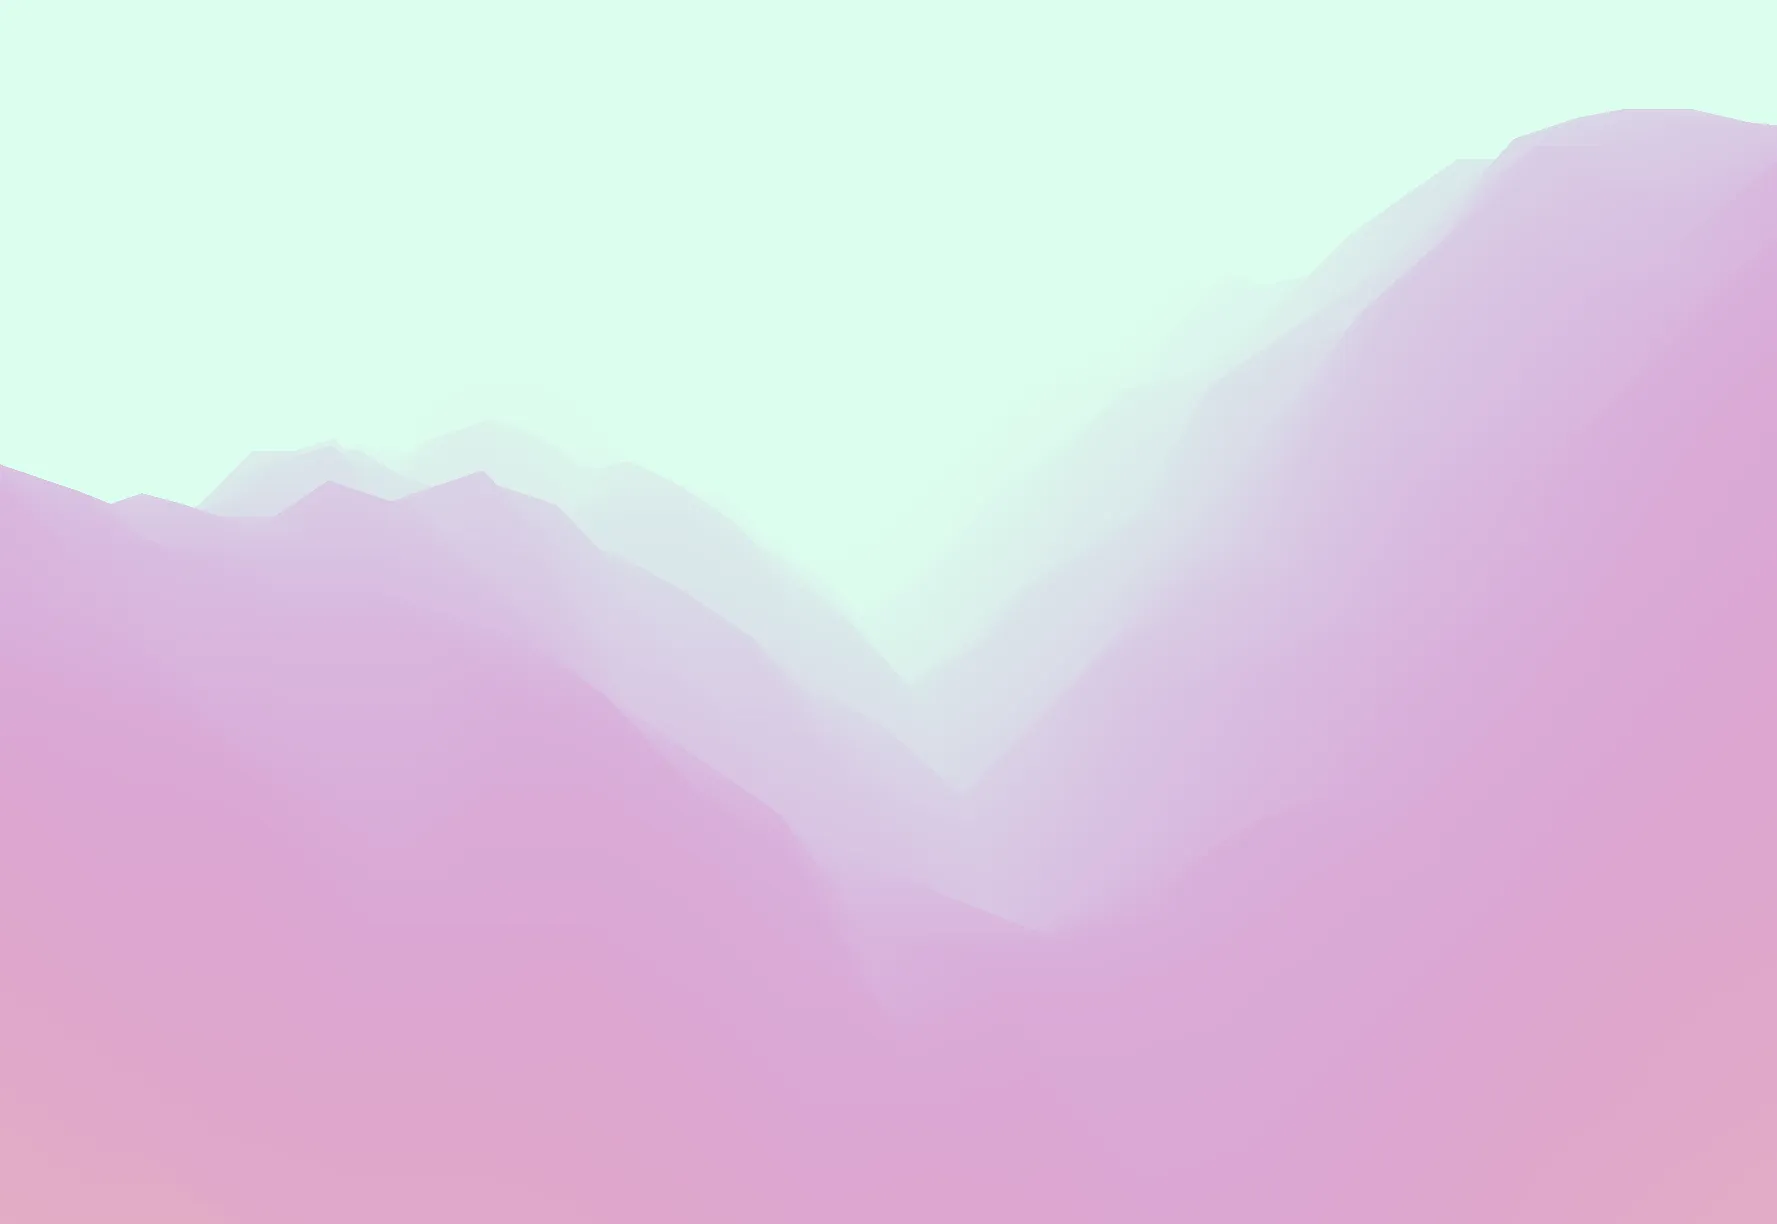 Turquoise fog over purple 3D mountains